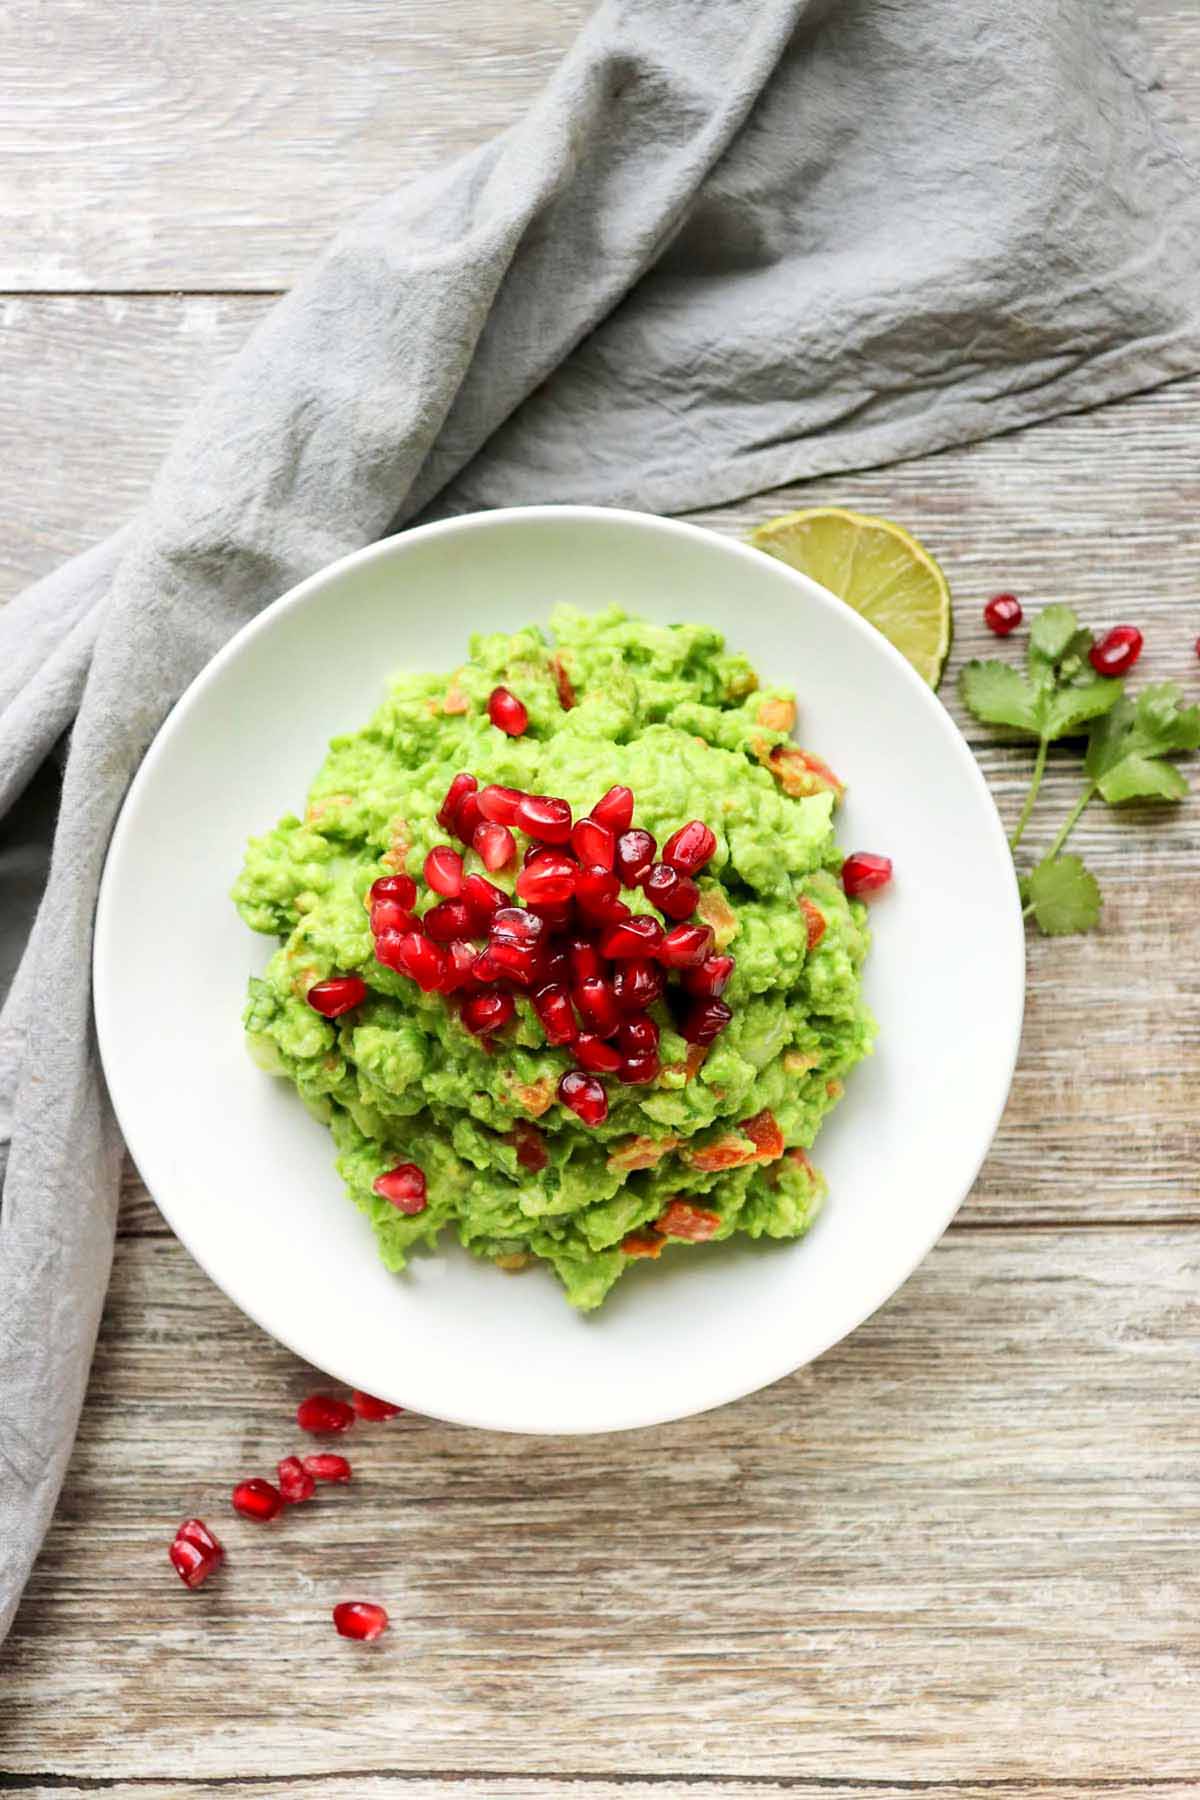 pea guacamole topped with pomegranate seeds.